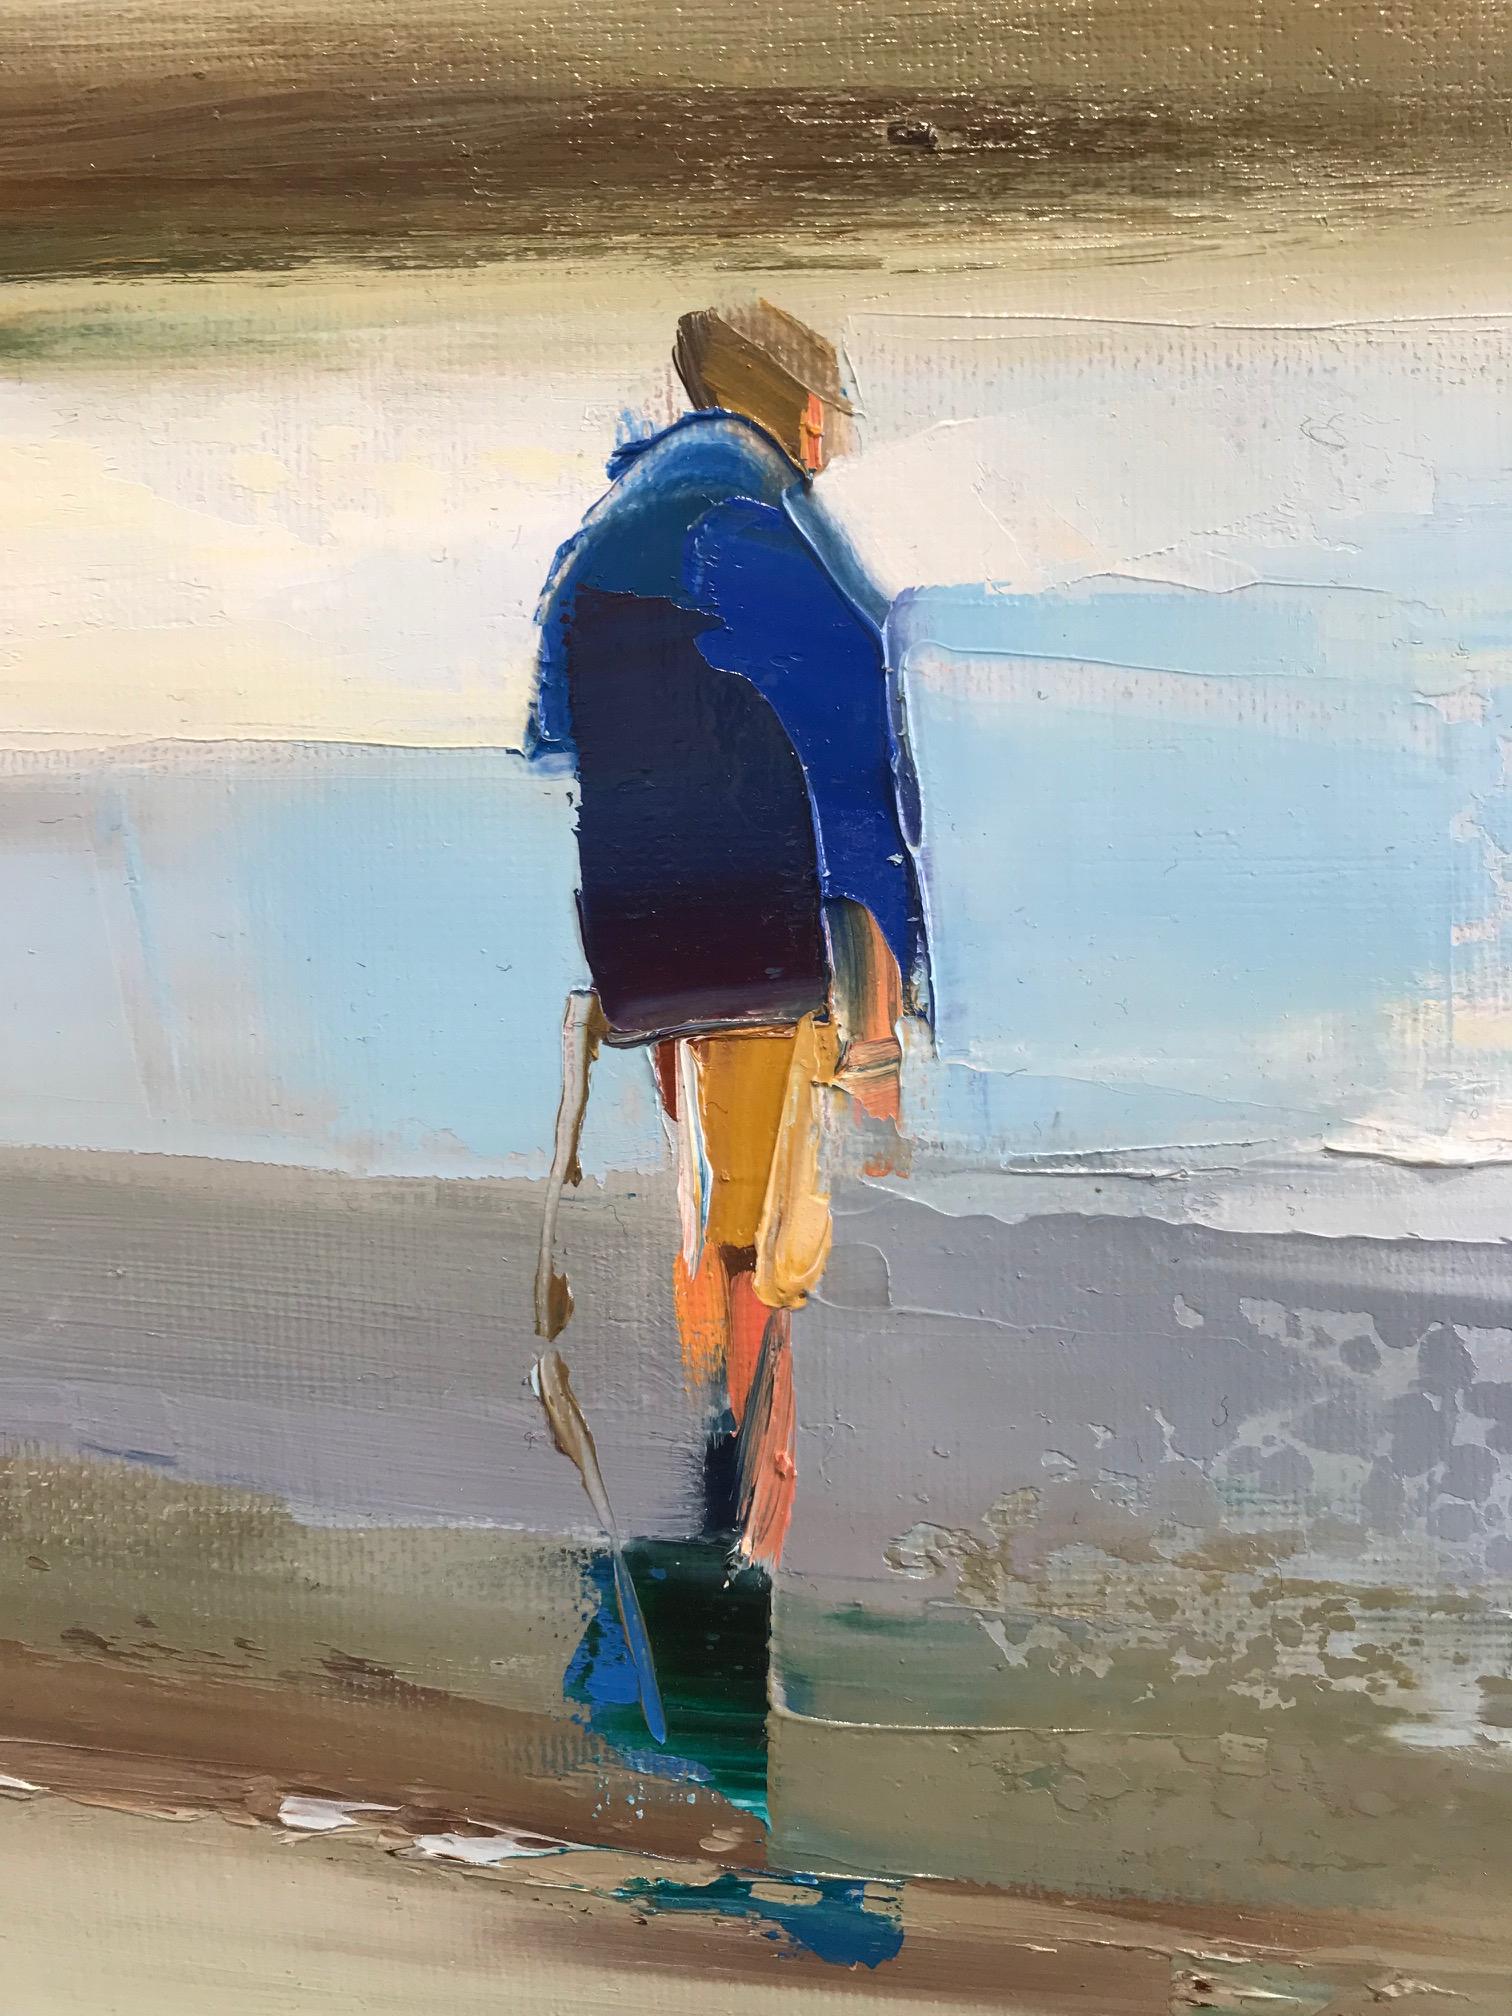 The Polish artist Ewa Rzeznik reflects reality in her colorful paintings: Fishermen along the French coast, families walking towards the Mon Saint-Michel, children playing in the surf. The bright use of color, almost luminous, attracts the